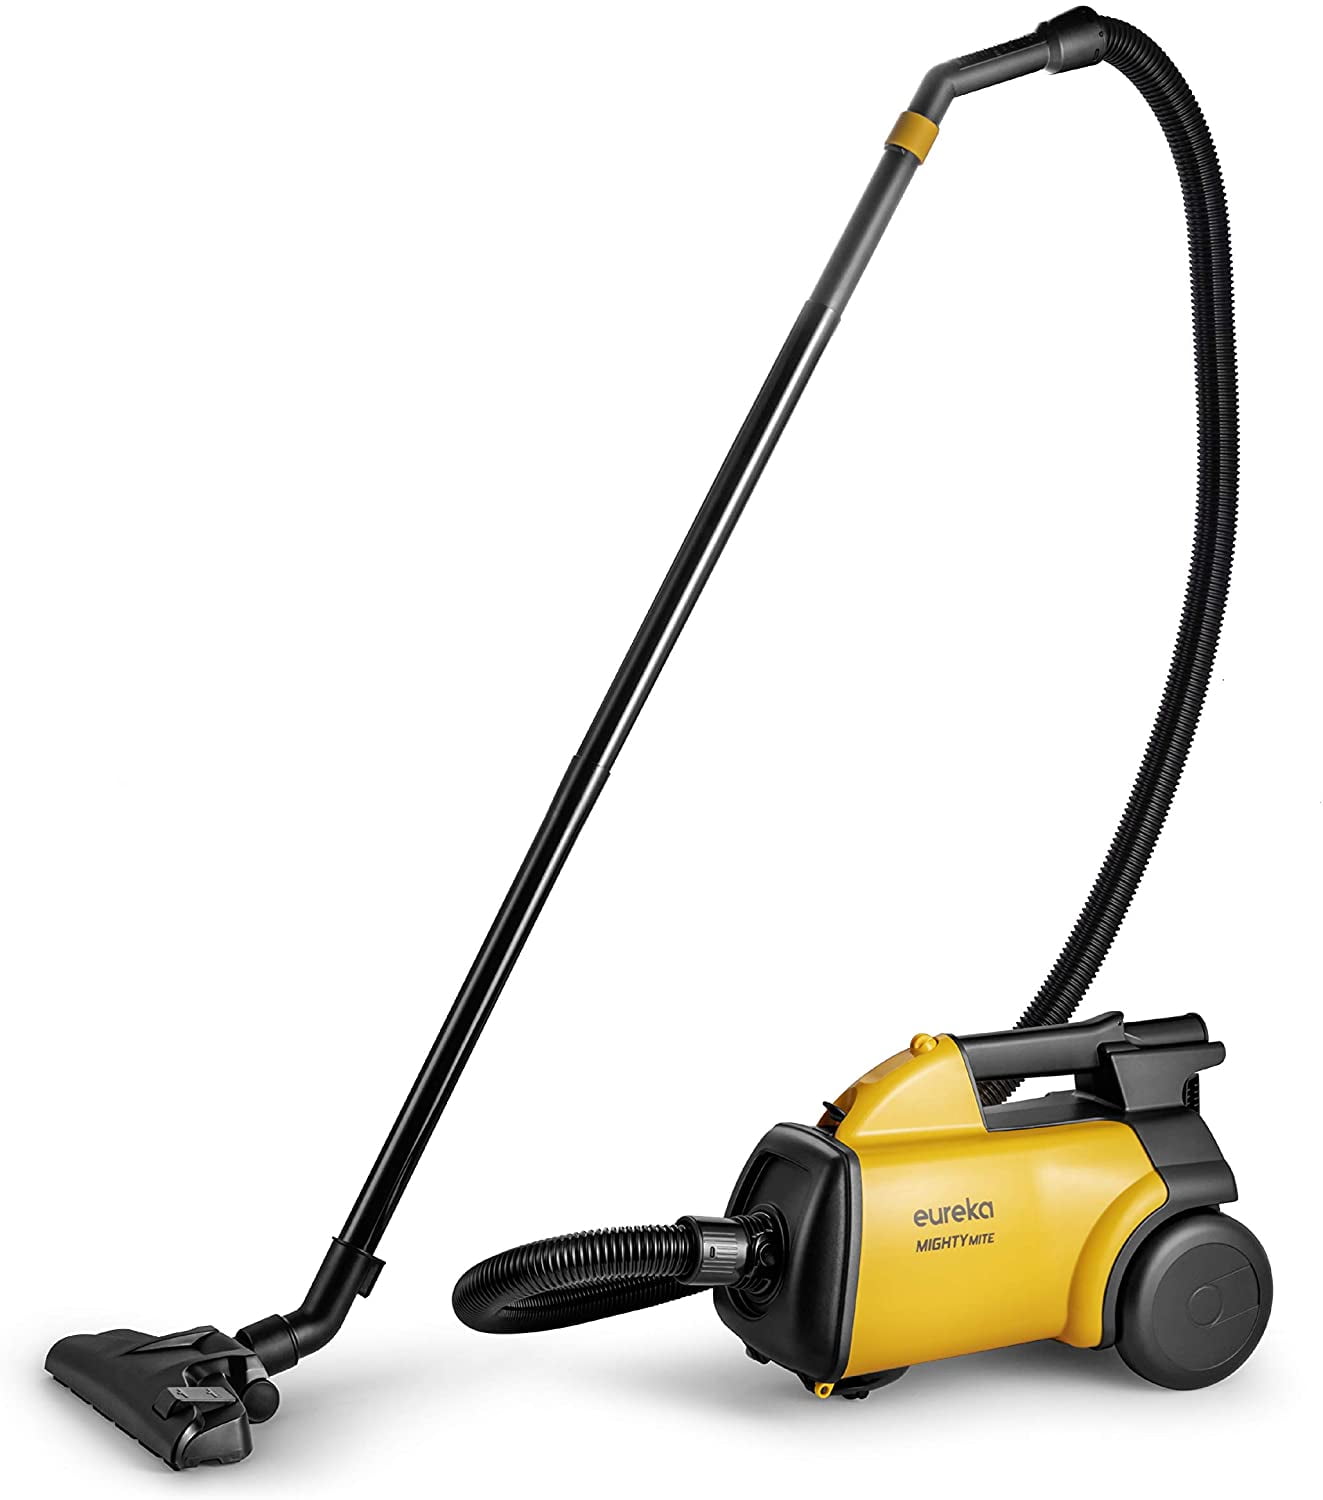 Eureka 12amp Mighty Mite Canister Vacuum Yellow Euk3670 for sale online 